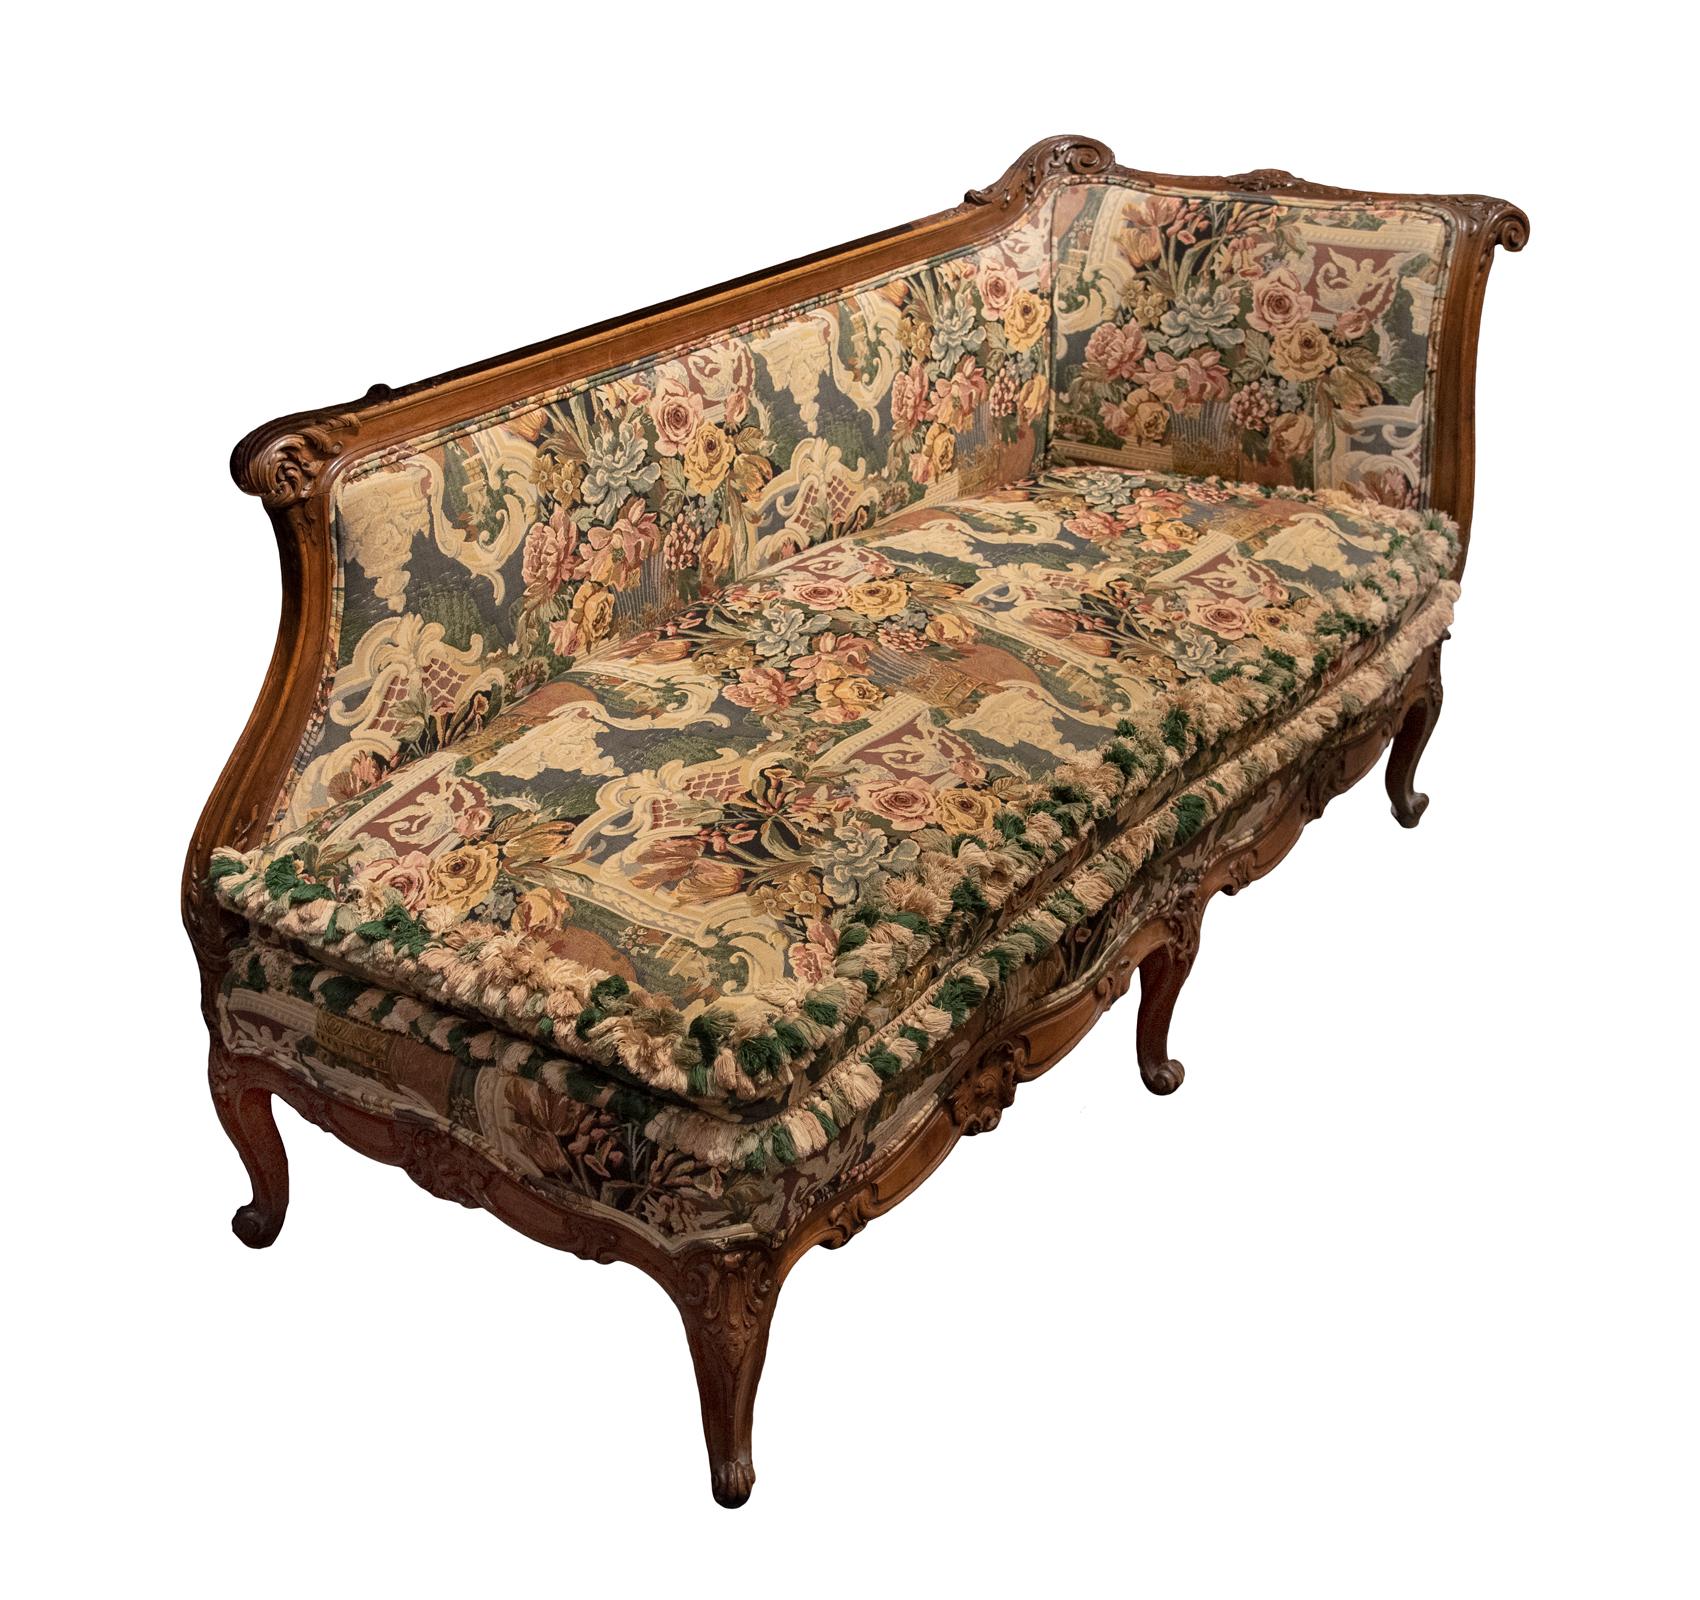 Crafted in France in the latter part of the 19th century in hand carved oak with floral and acanthus leaf motifs. Comfortably upholstered in an intricate floral tapestry material.

Measures: 36 H x 66 W x 26.5 D inches, 18.5 in. seat height.